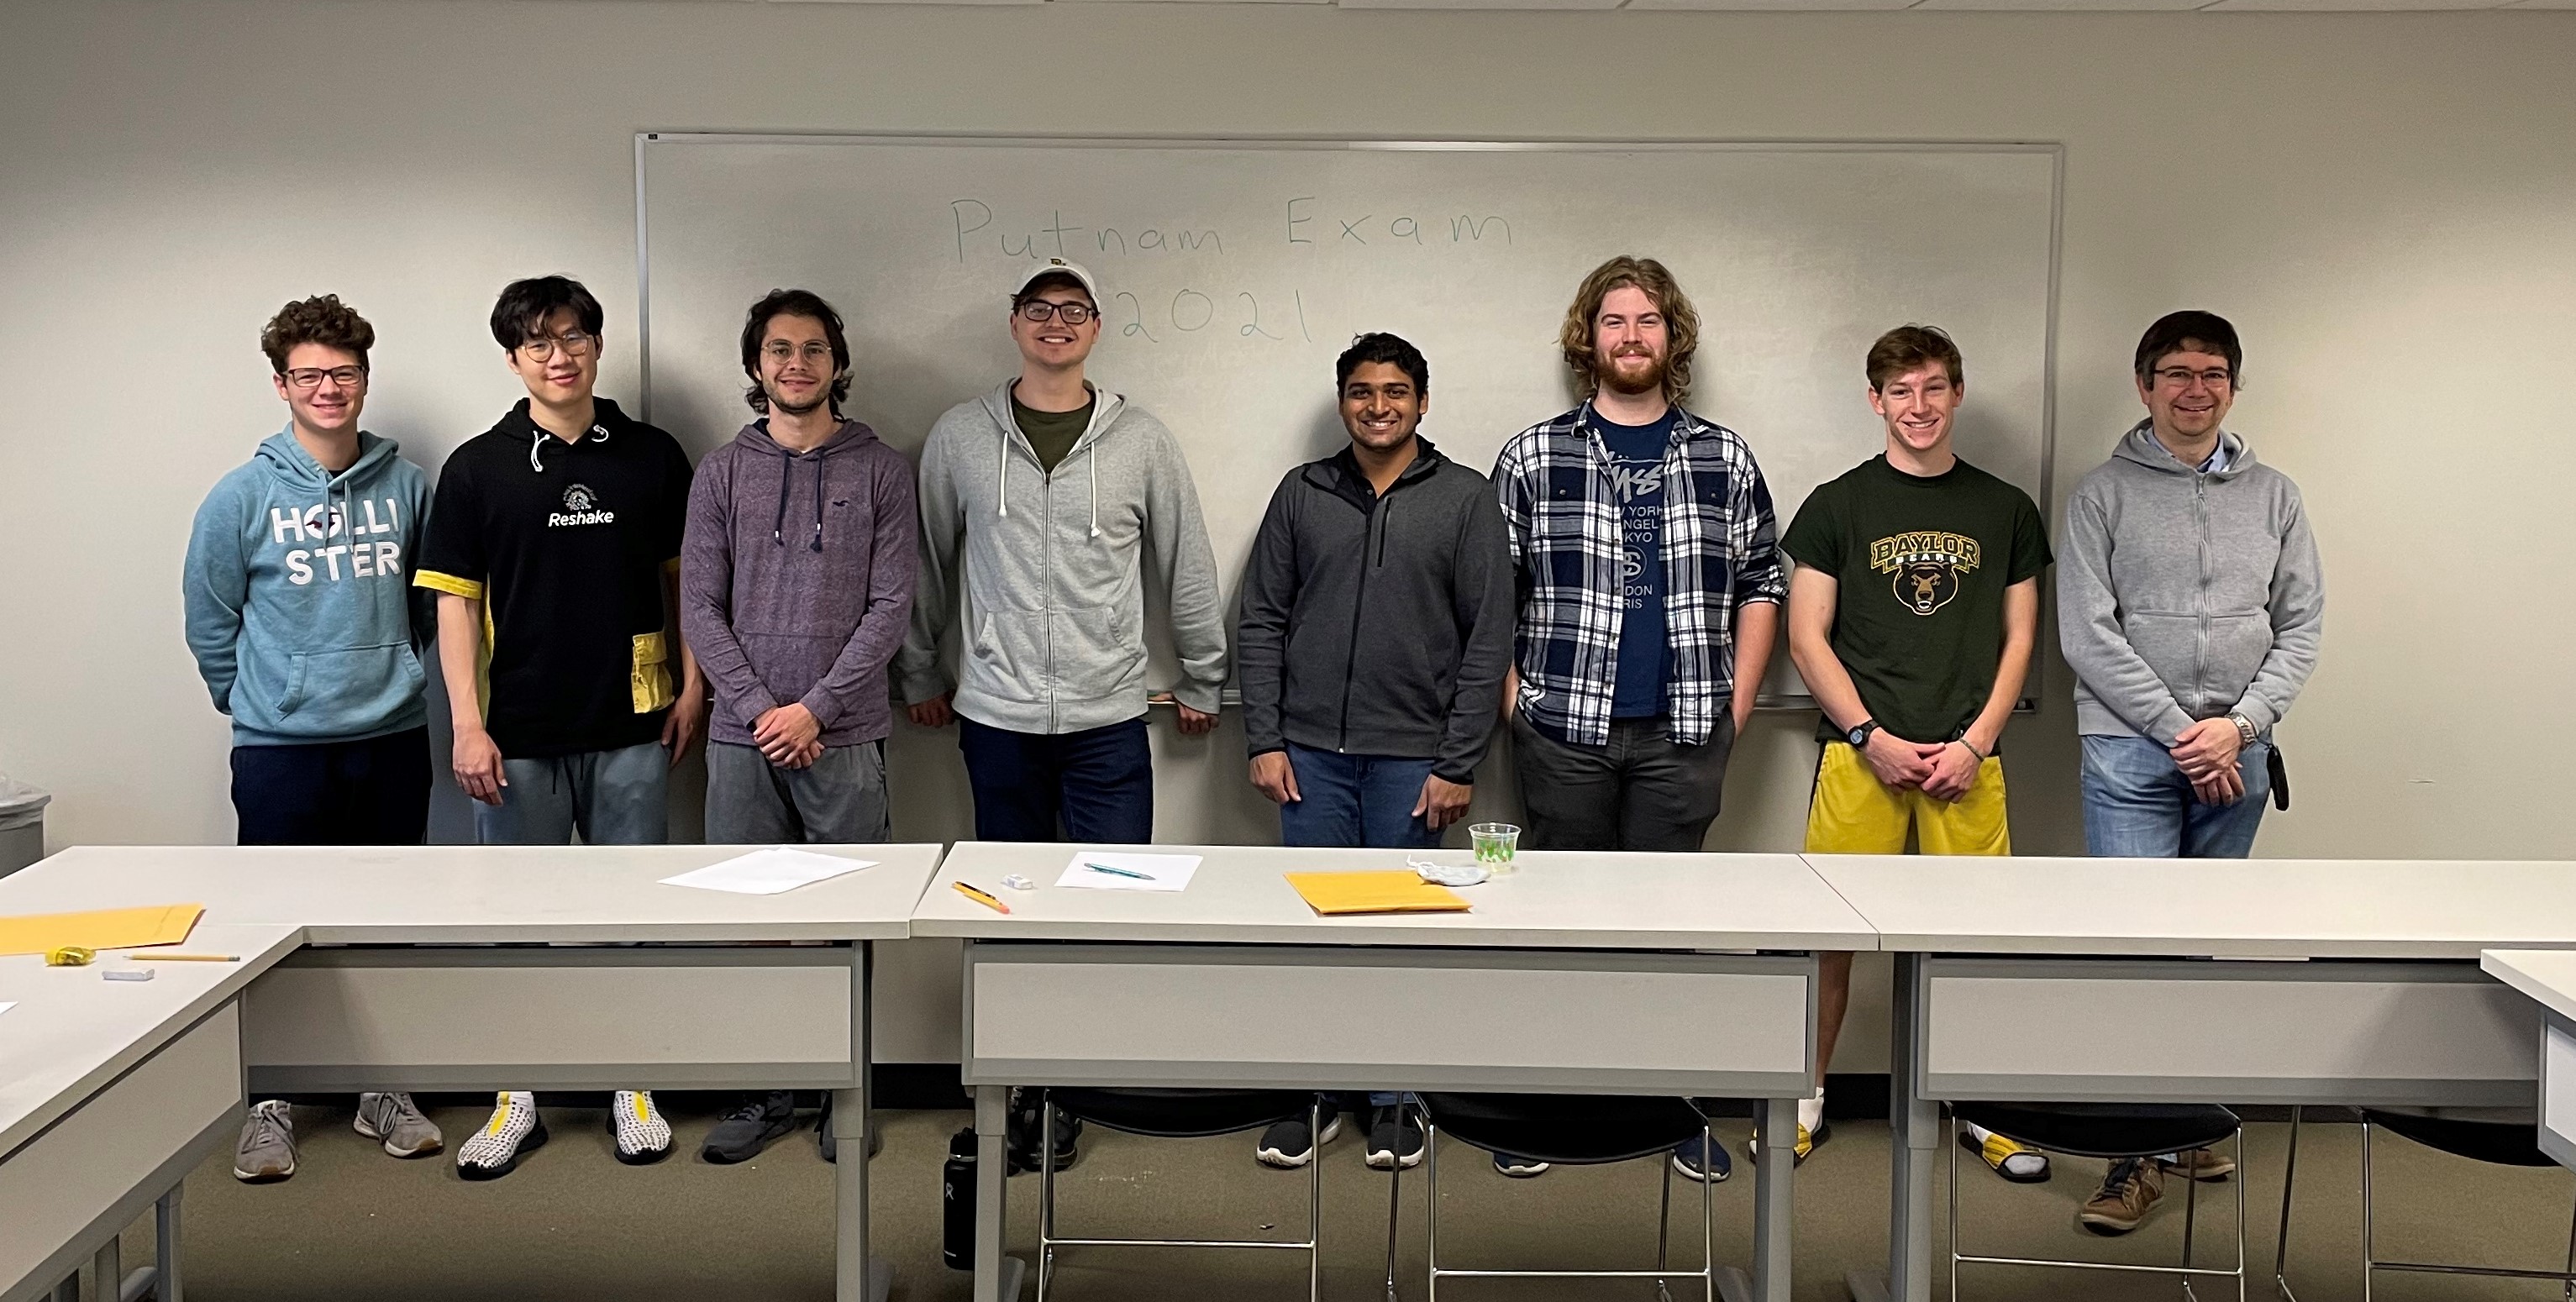 Pictured are members of the 2021 Baylor University Putnam Exam Team.